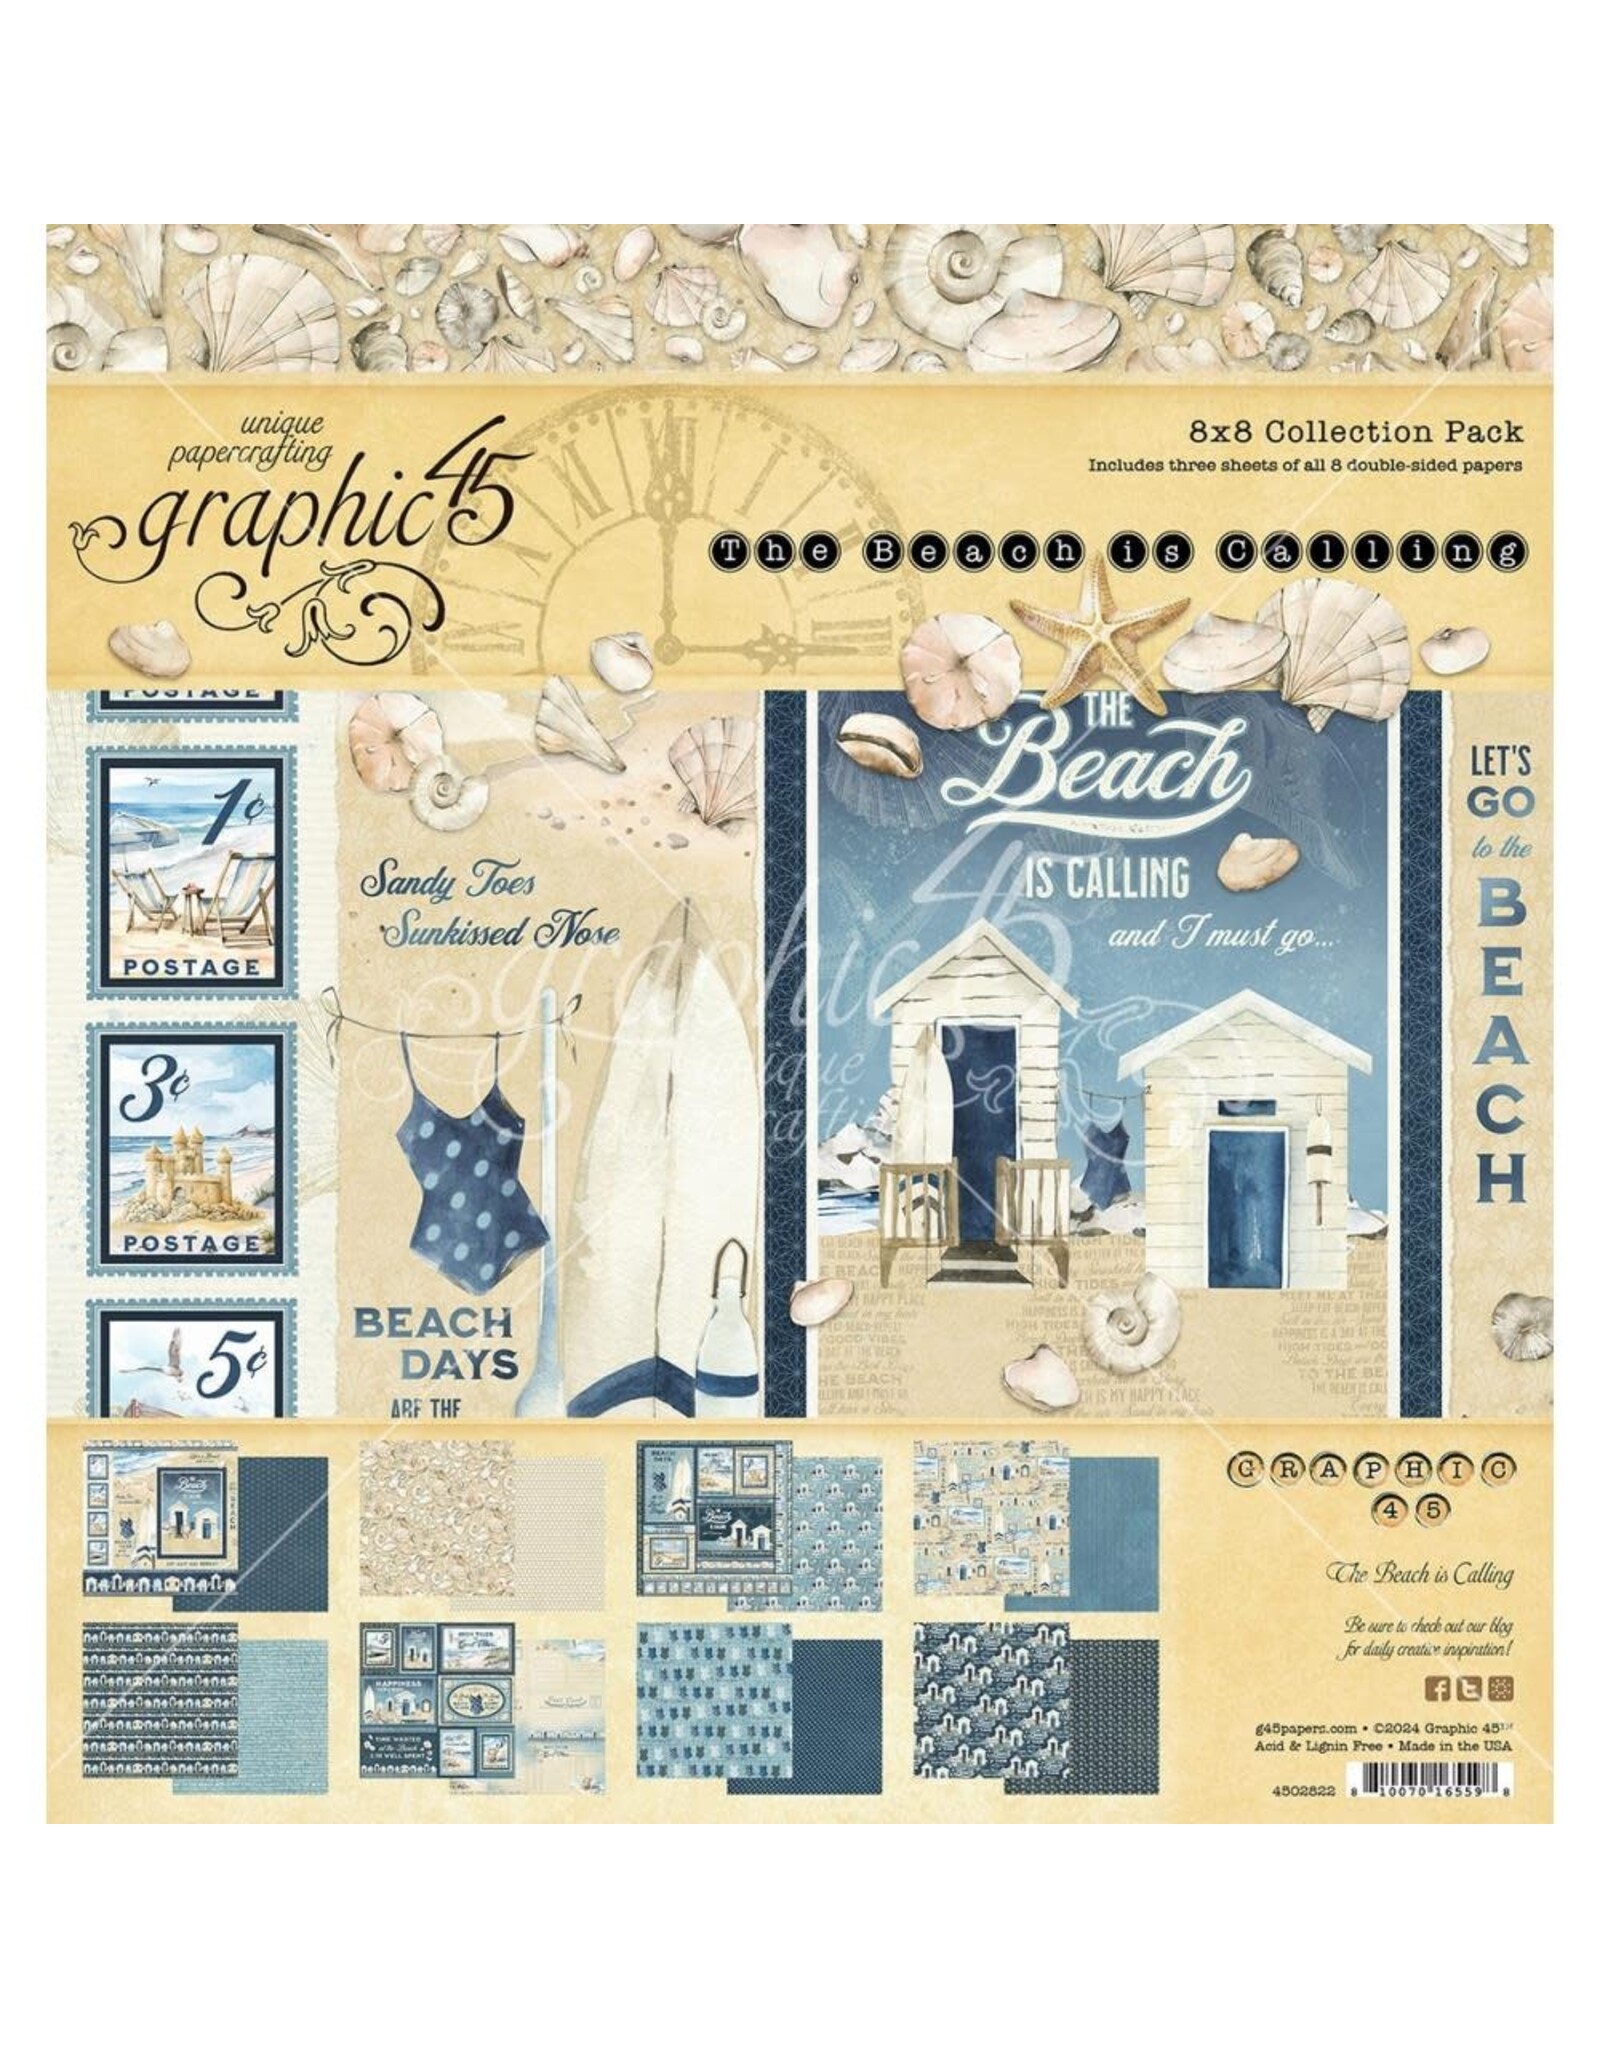 GRAPHIC 45 GRAPHIC 45 THE BEACH IS CALLING COLLECTION 8x8 COLLECTION PACK 16 SHEETS